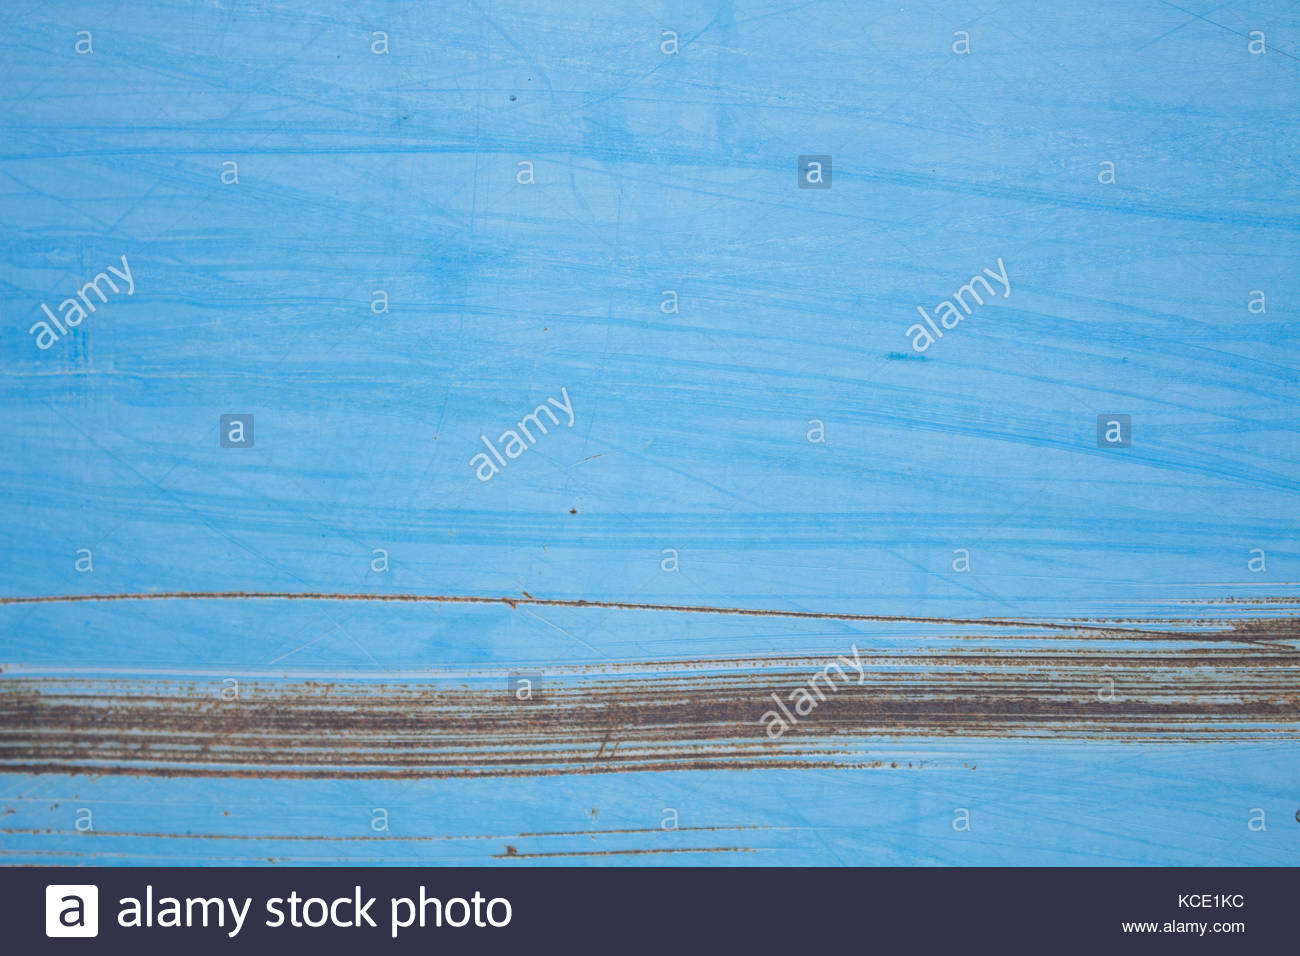 Rust Rusty Corroded Oxidize Colorful Surface Metal Sheet Plate